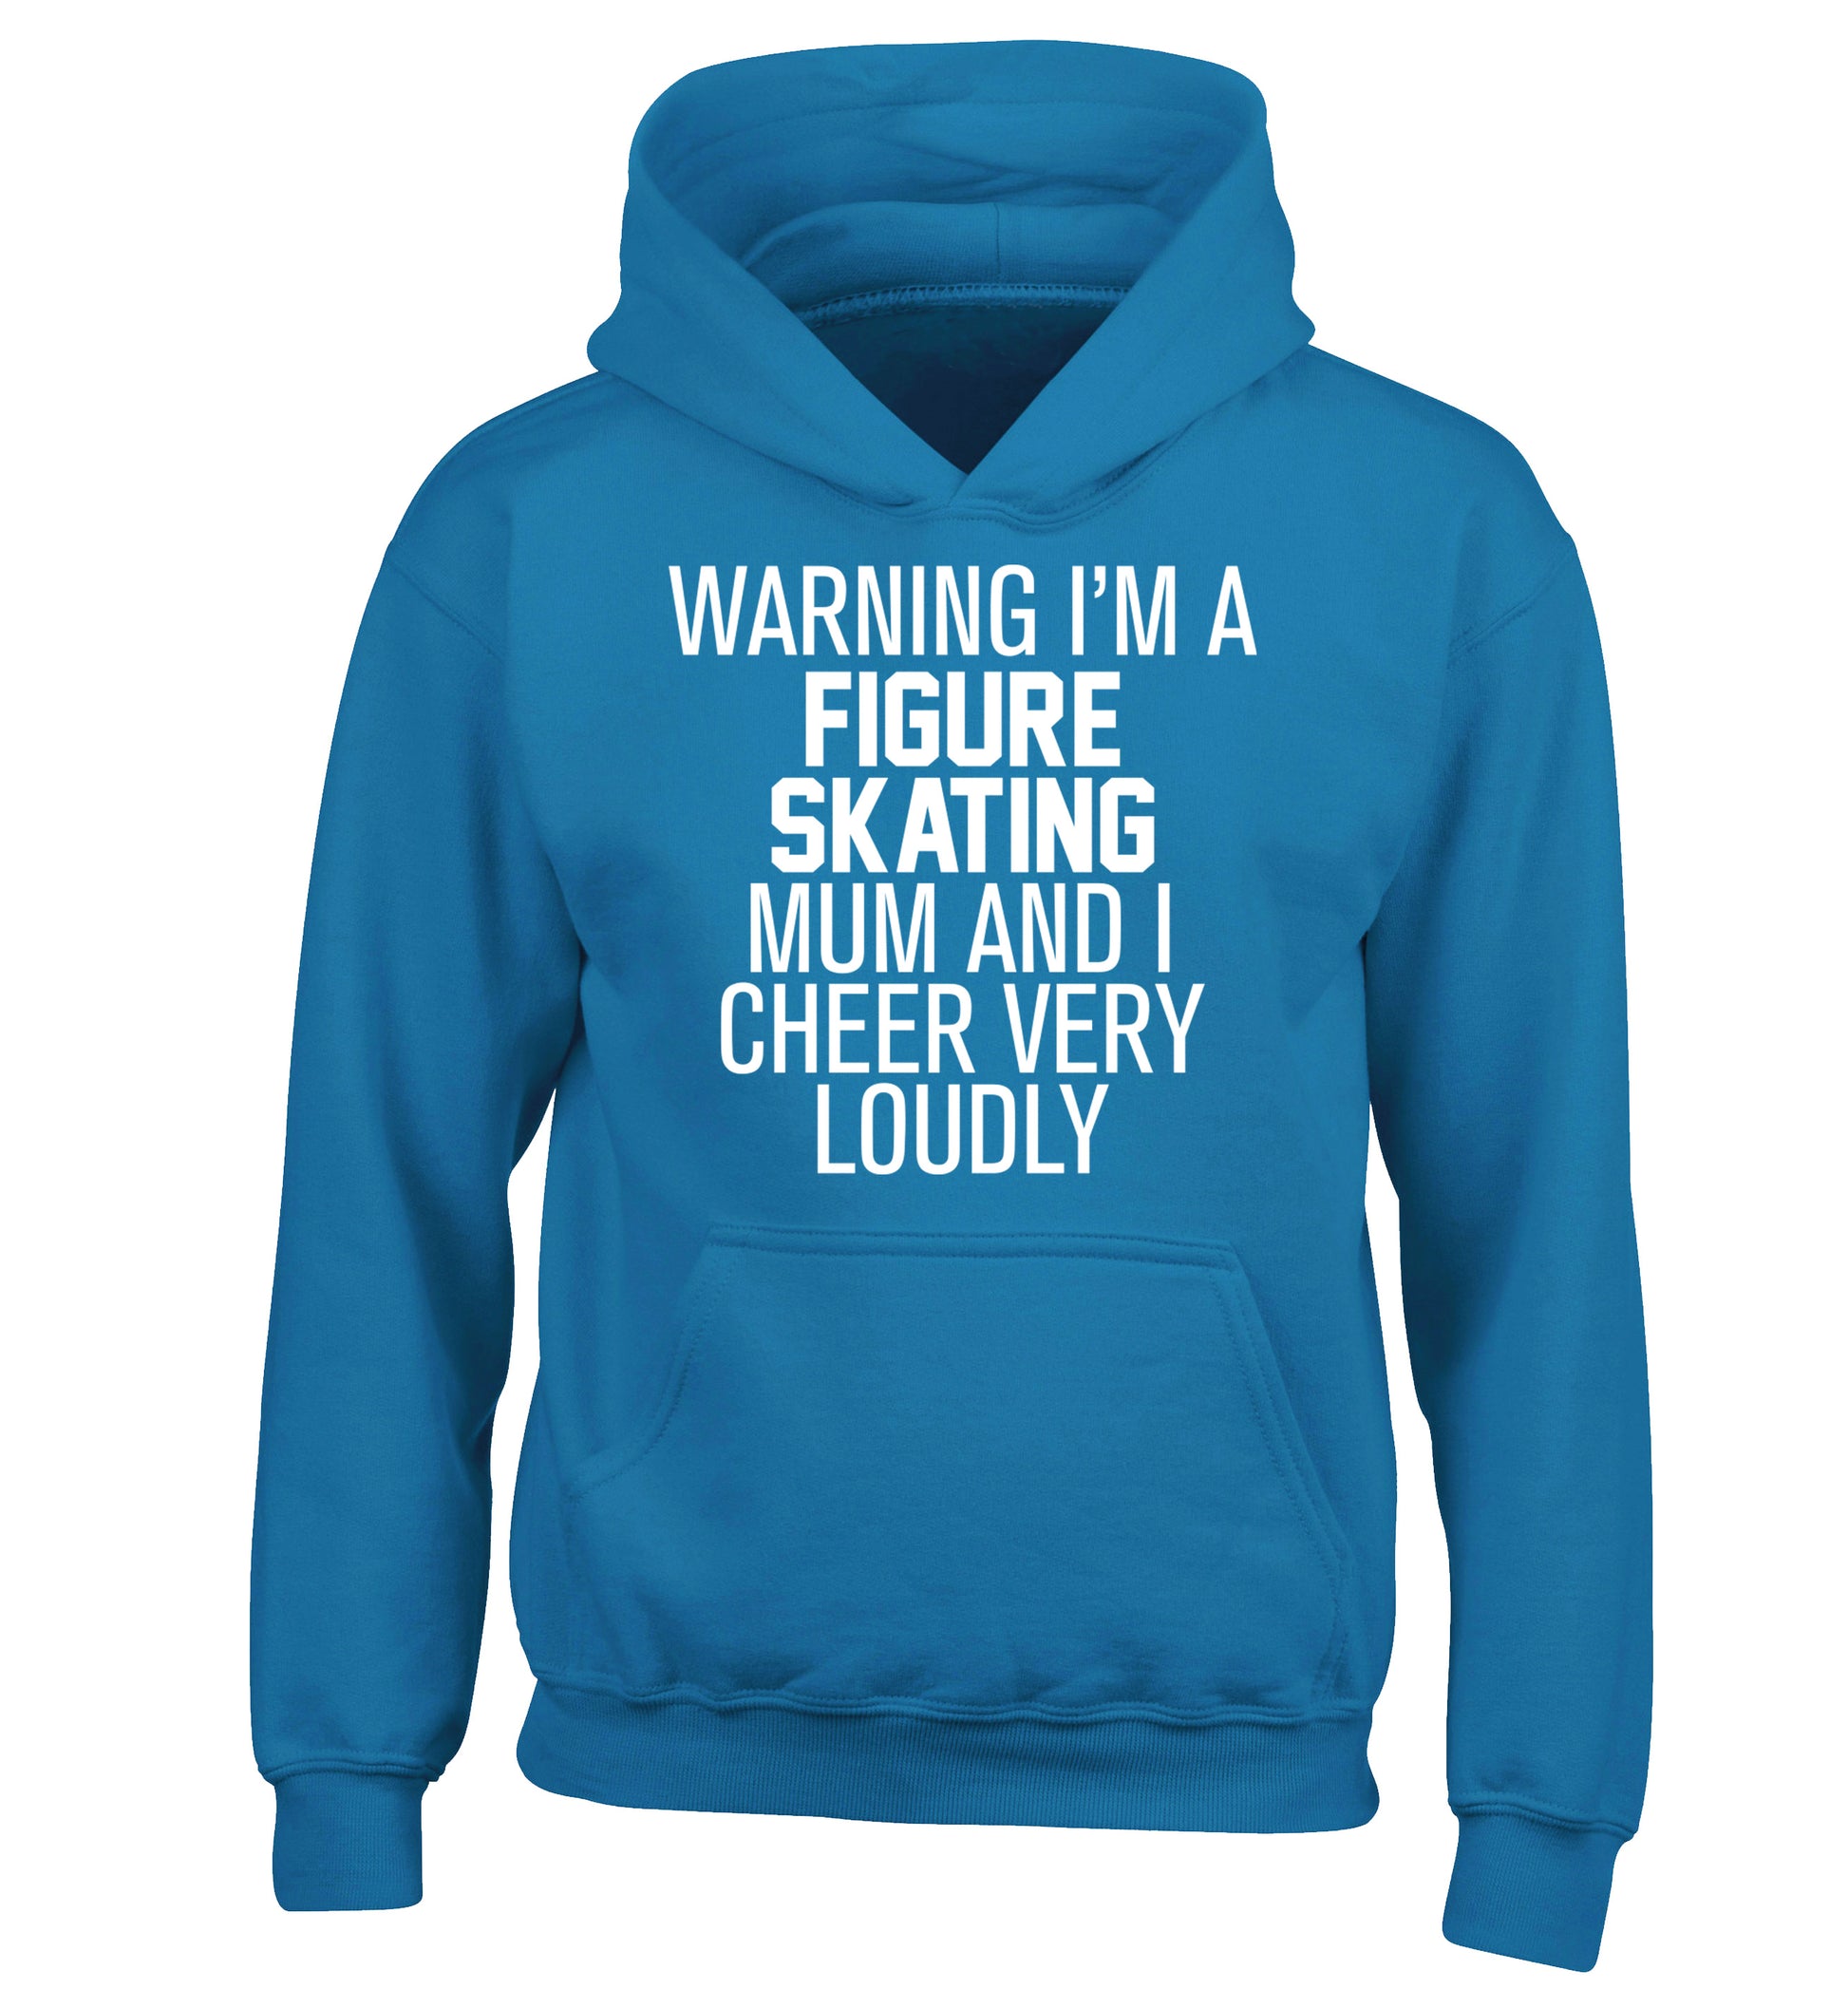 Warning I'm a figure skating mum and I cheer very loudly children's blue hoodie 12-14 Years